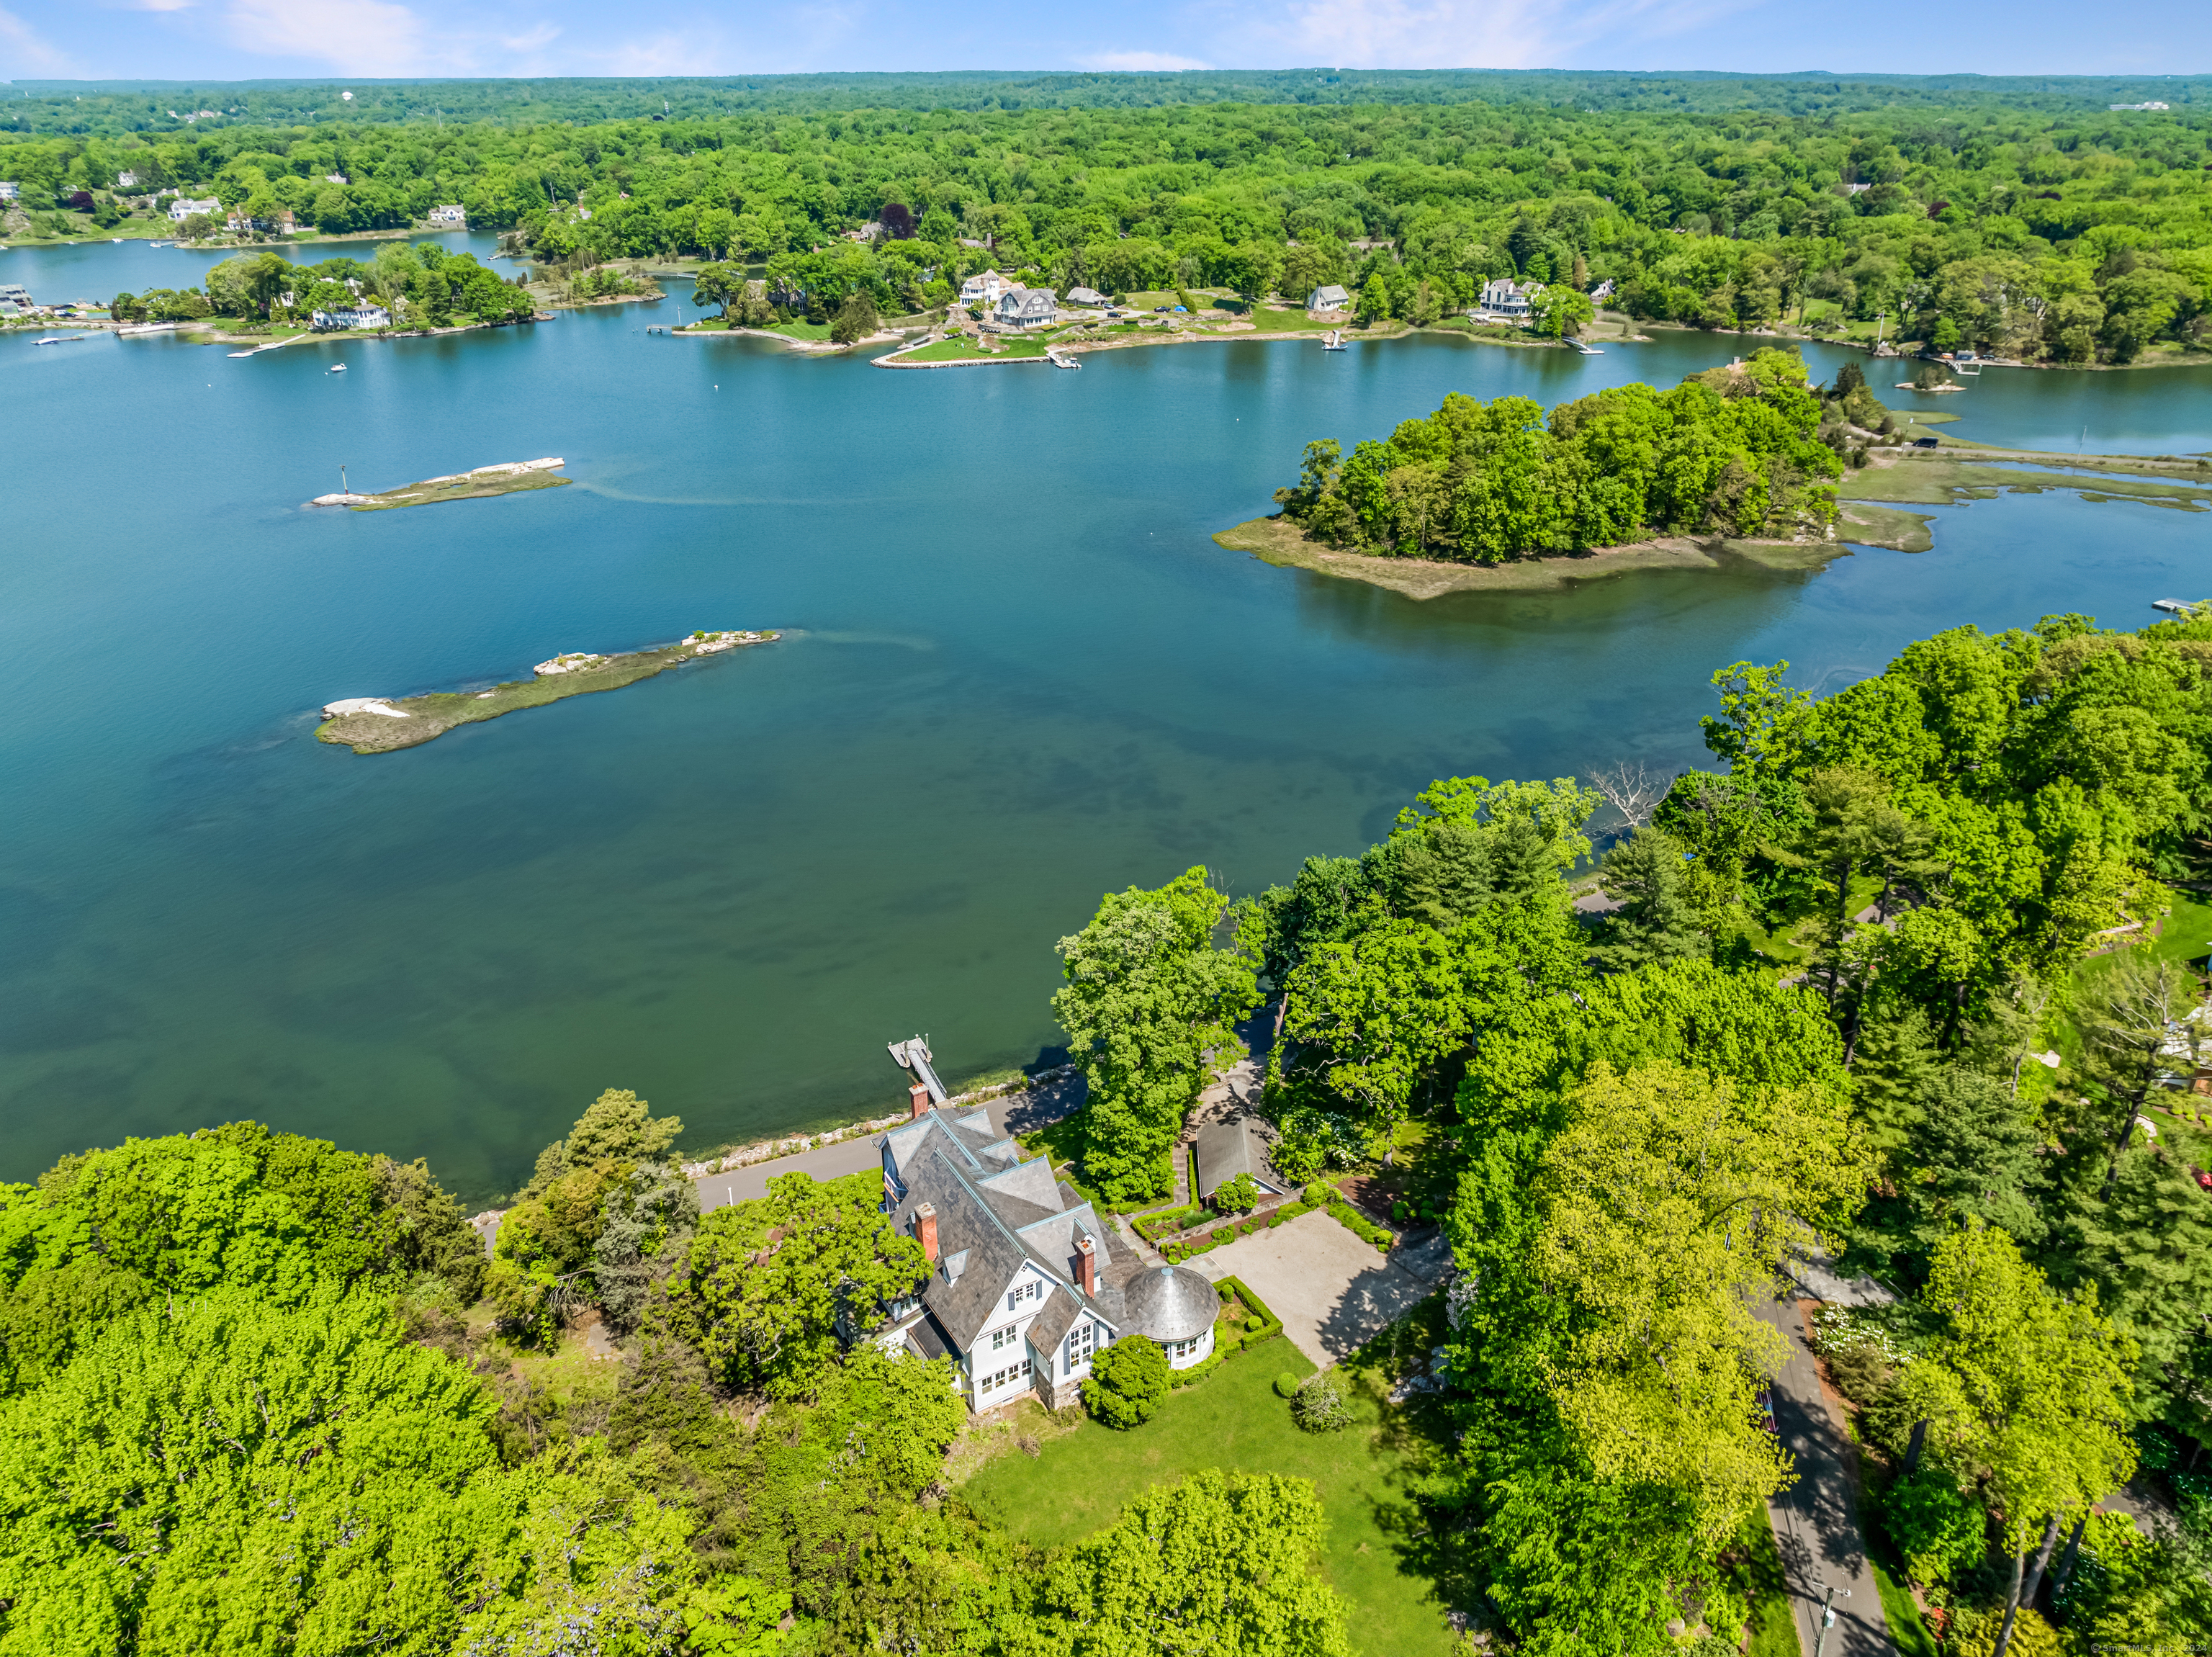 Property for Sale at 31 Contentment Island Road, Darien, Connecticut - Bedrooms: 5 
Bathrooms: 5 
Rooms: 17  - $7,750,000